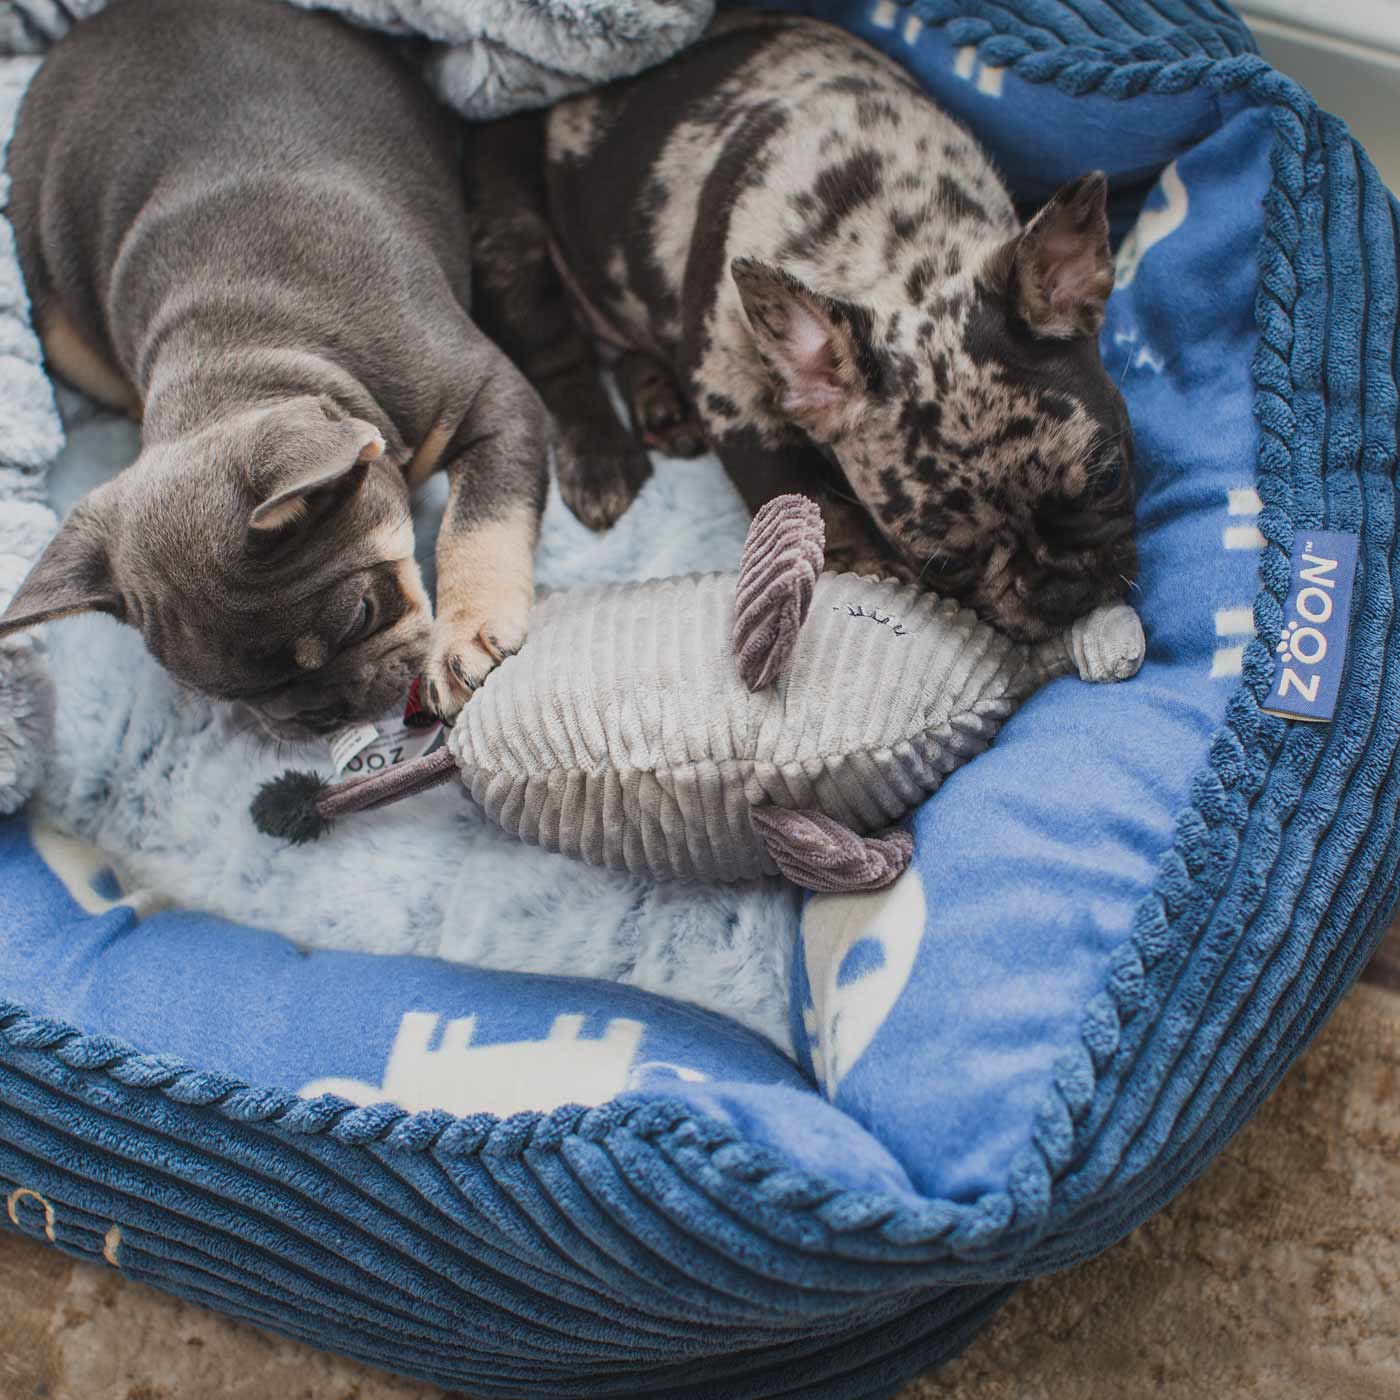 Zoon jumbo bed top view of French bulldogs playing